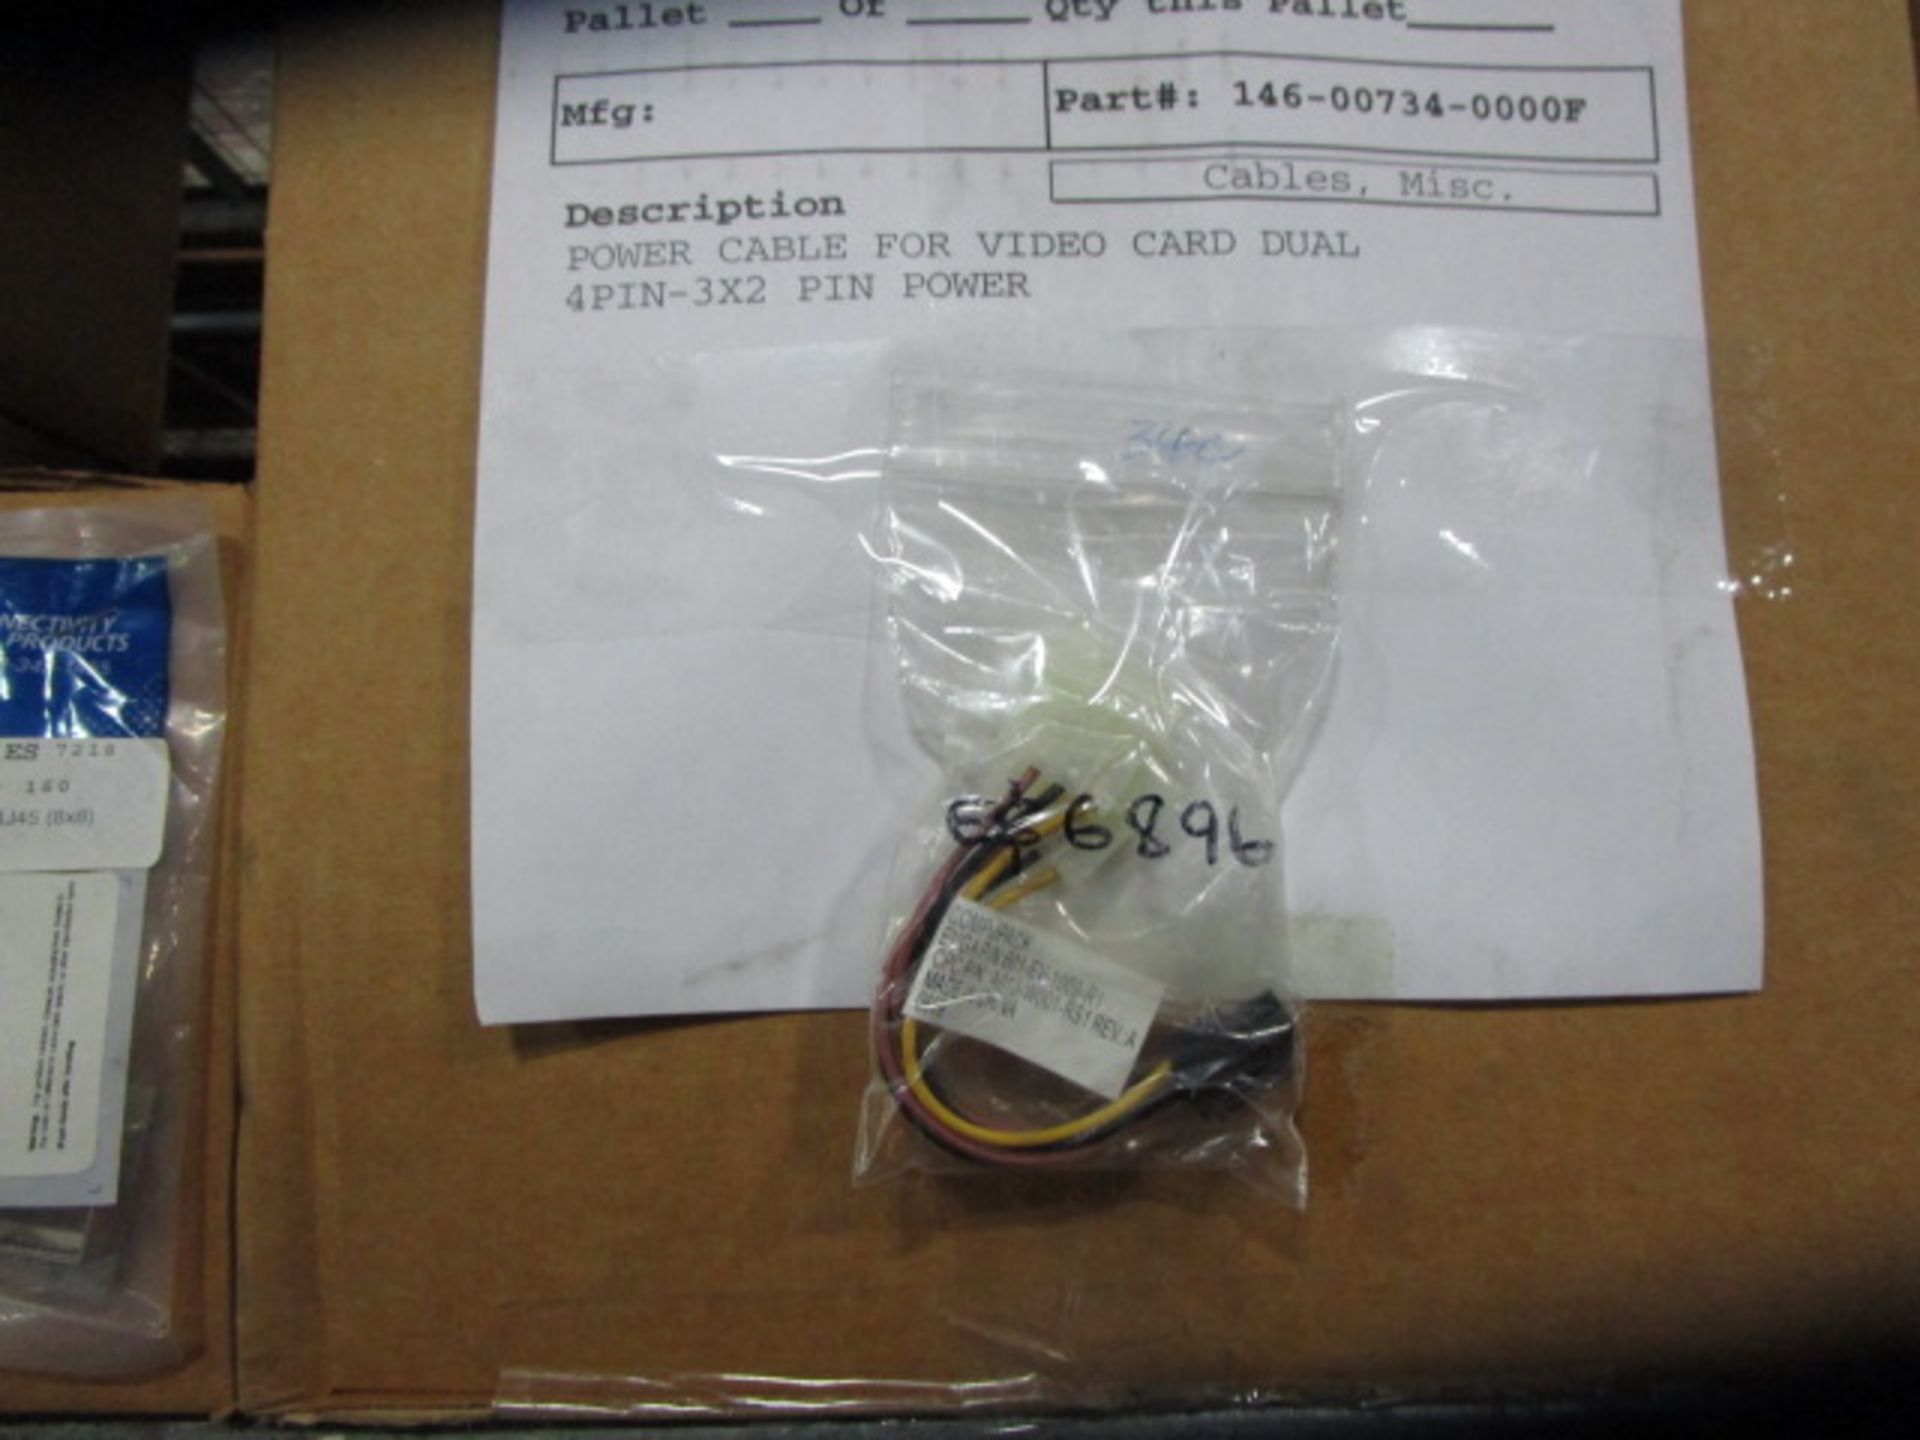 CONTENTS ONLY CONTAINING DIGITAL VIDEO CAMERAS, CABLES, PANEL MOUNTS, POWER ADAPTER - Image 4 of 8